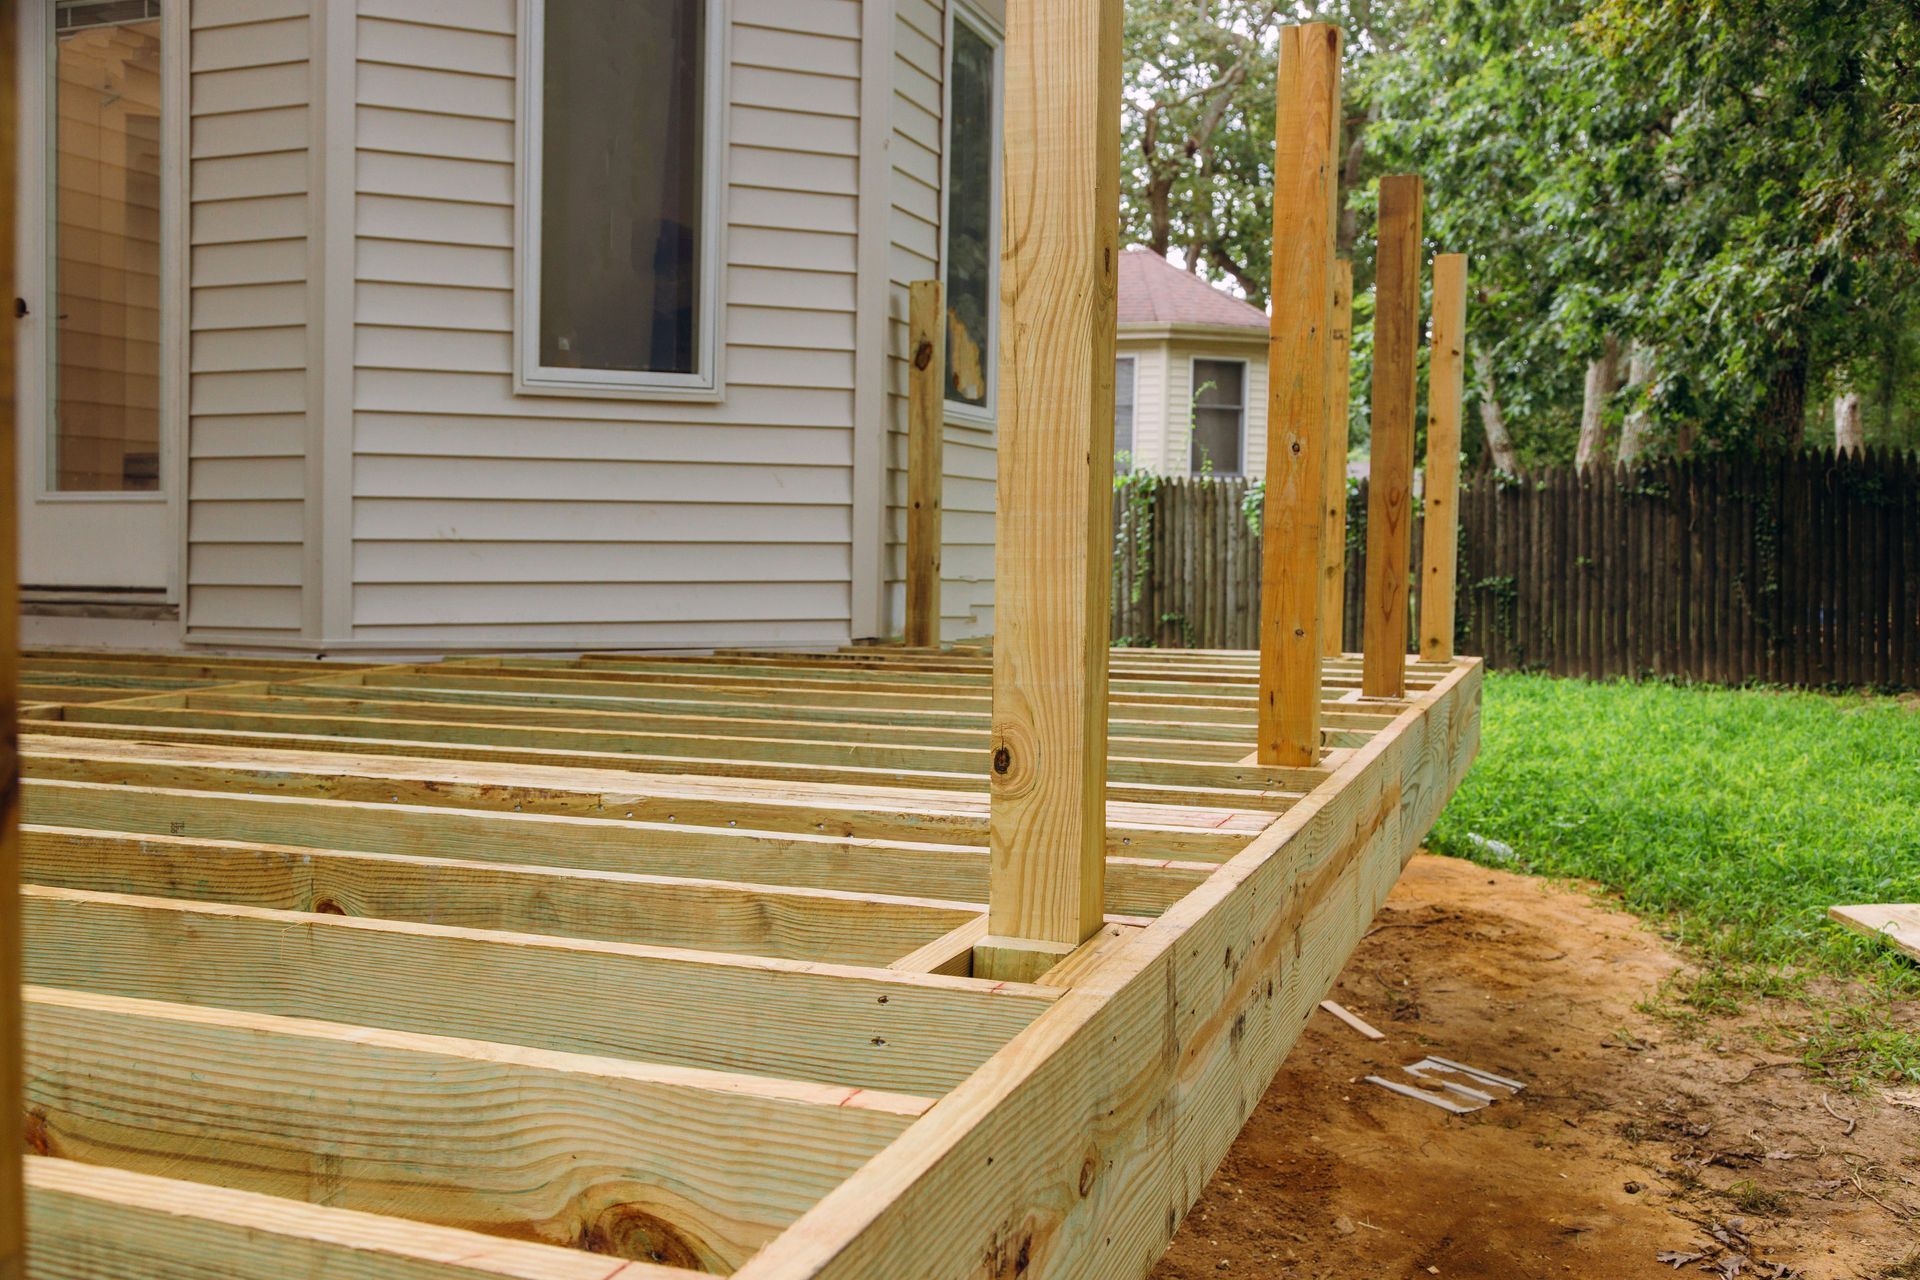 An elevated wooden frame for a new deck patio, with sturdy beams and supports.